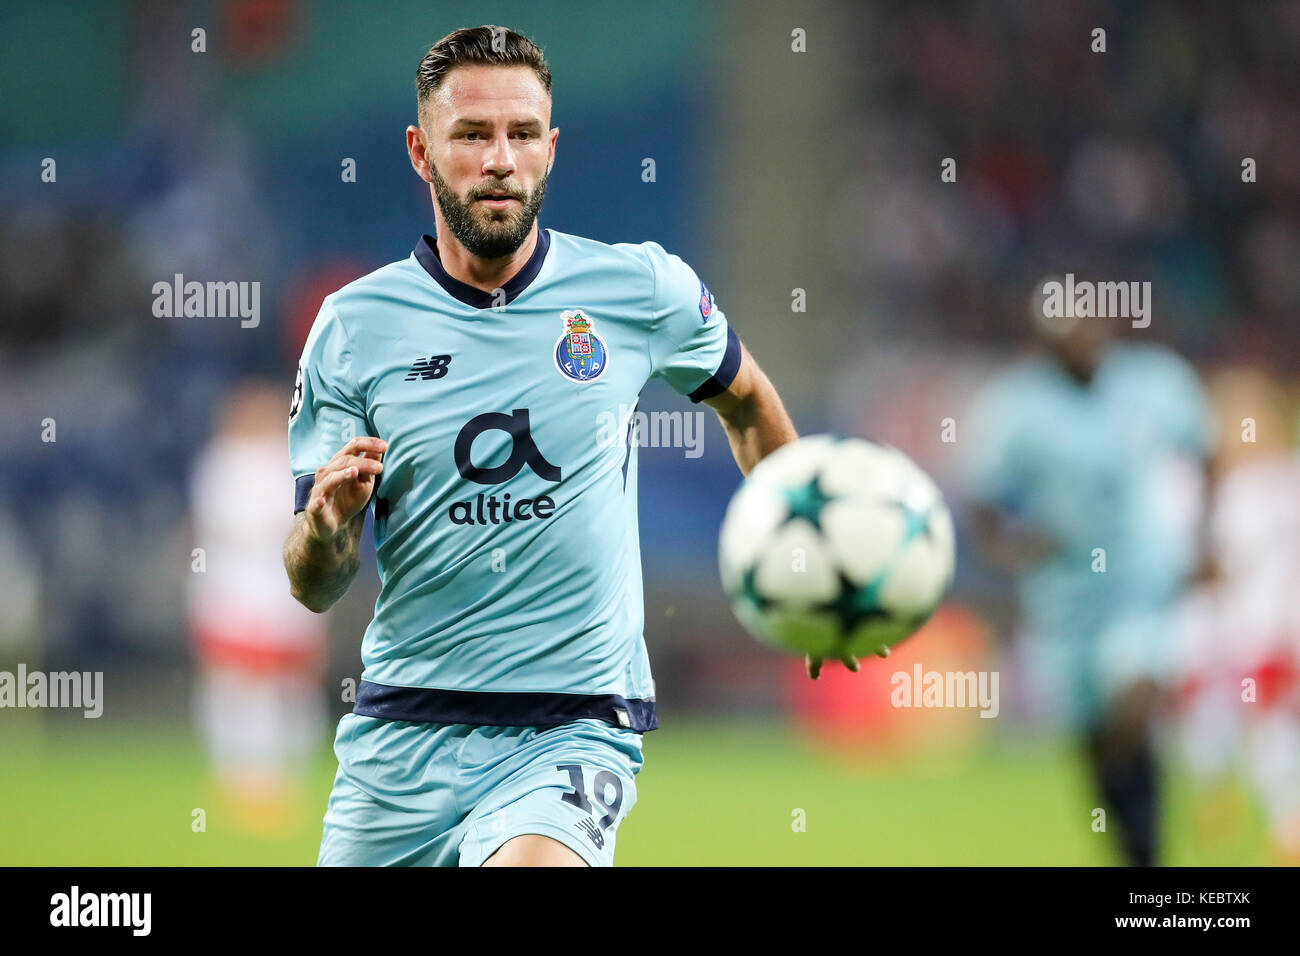 Leipzig, Germany. 17th Oct, 2017. Porto's Miguel Layún during the Champions League group stages qualification match between RB Leipzig and FC Porto in the Red Bull Arena in Leipzig, Germany, 17 October 2017. Credit: Jan Woitas/dpa-Zentralbild/dpa/Alamy Live News Stock Photo